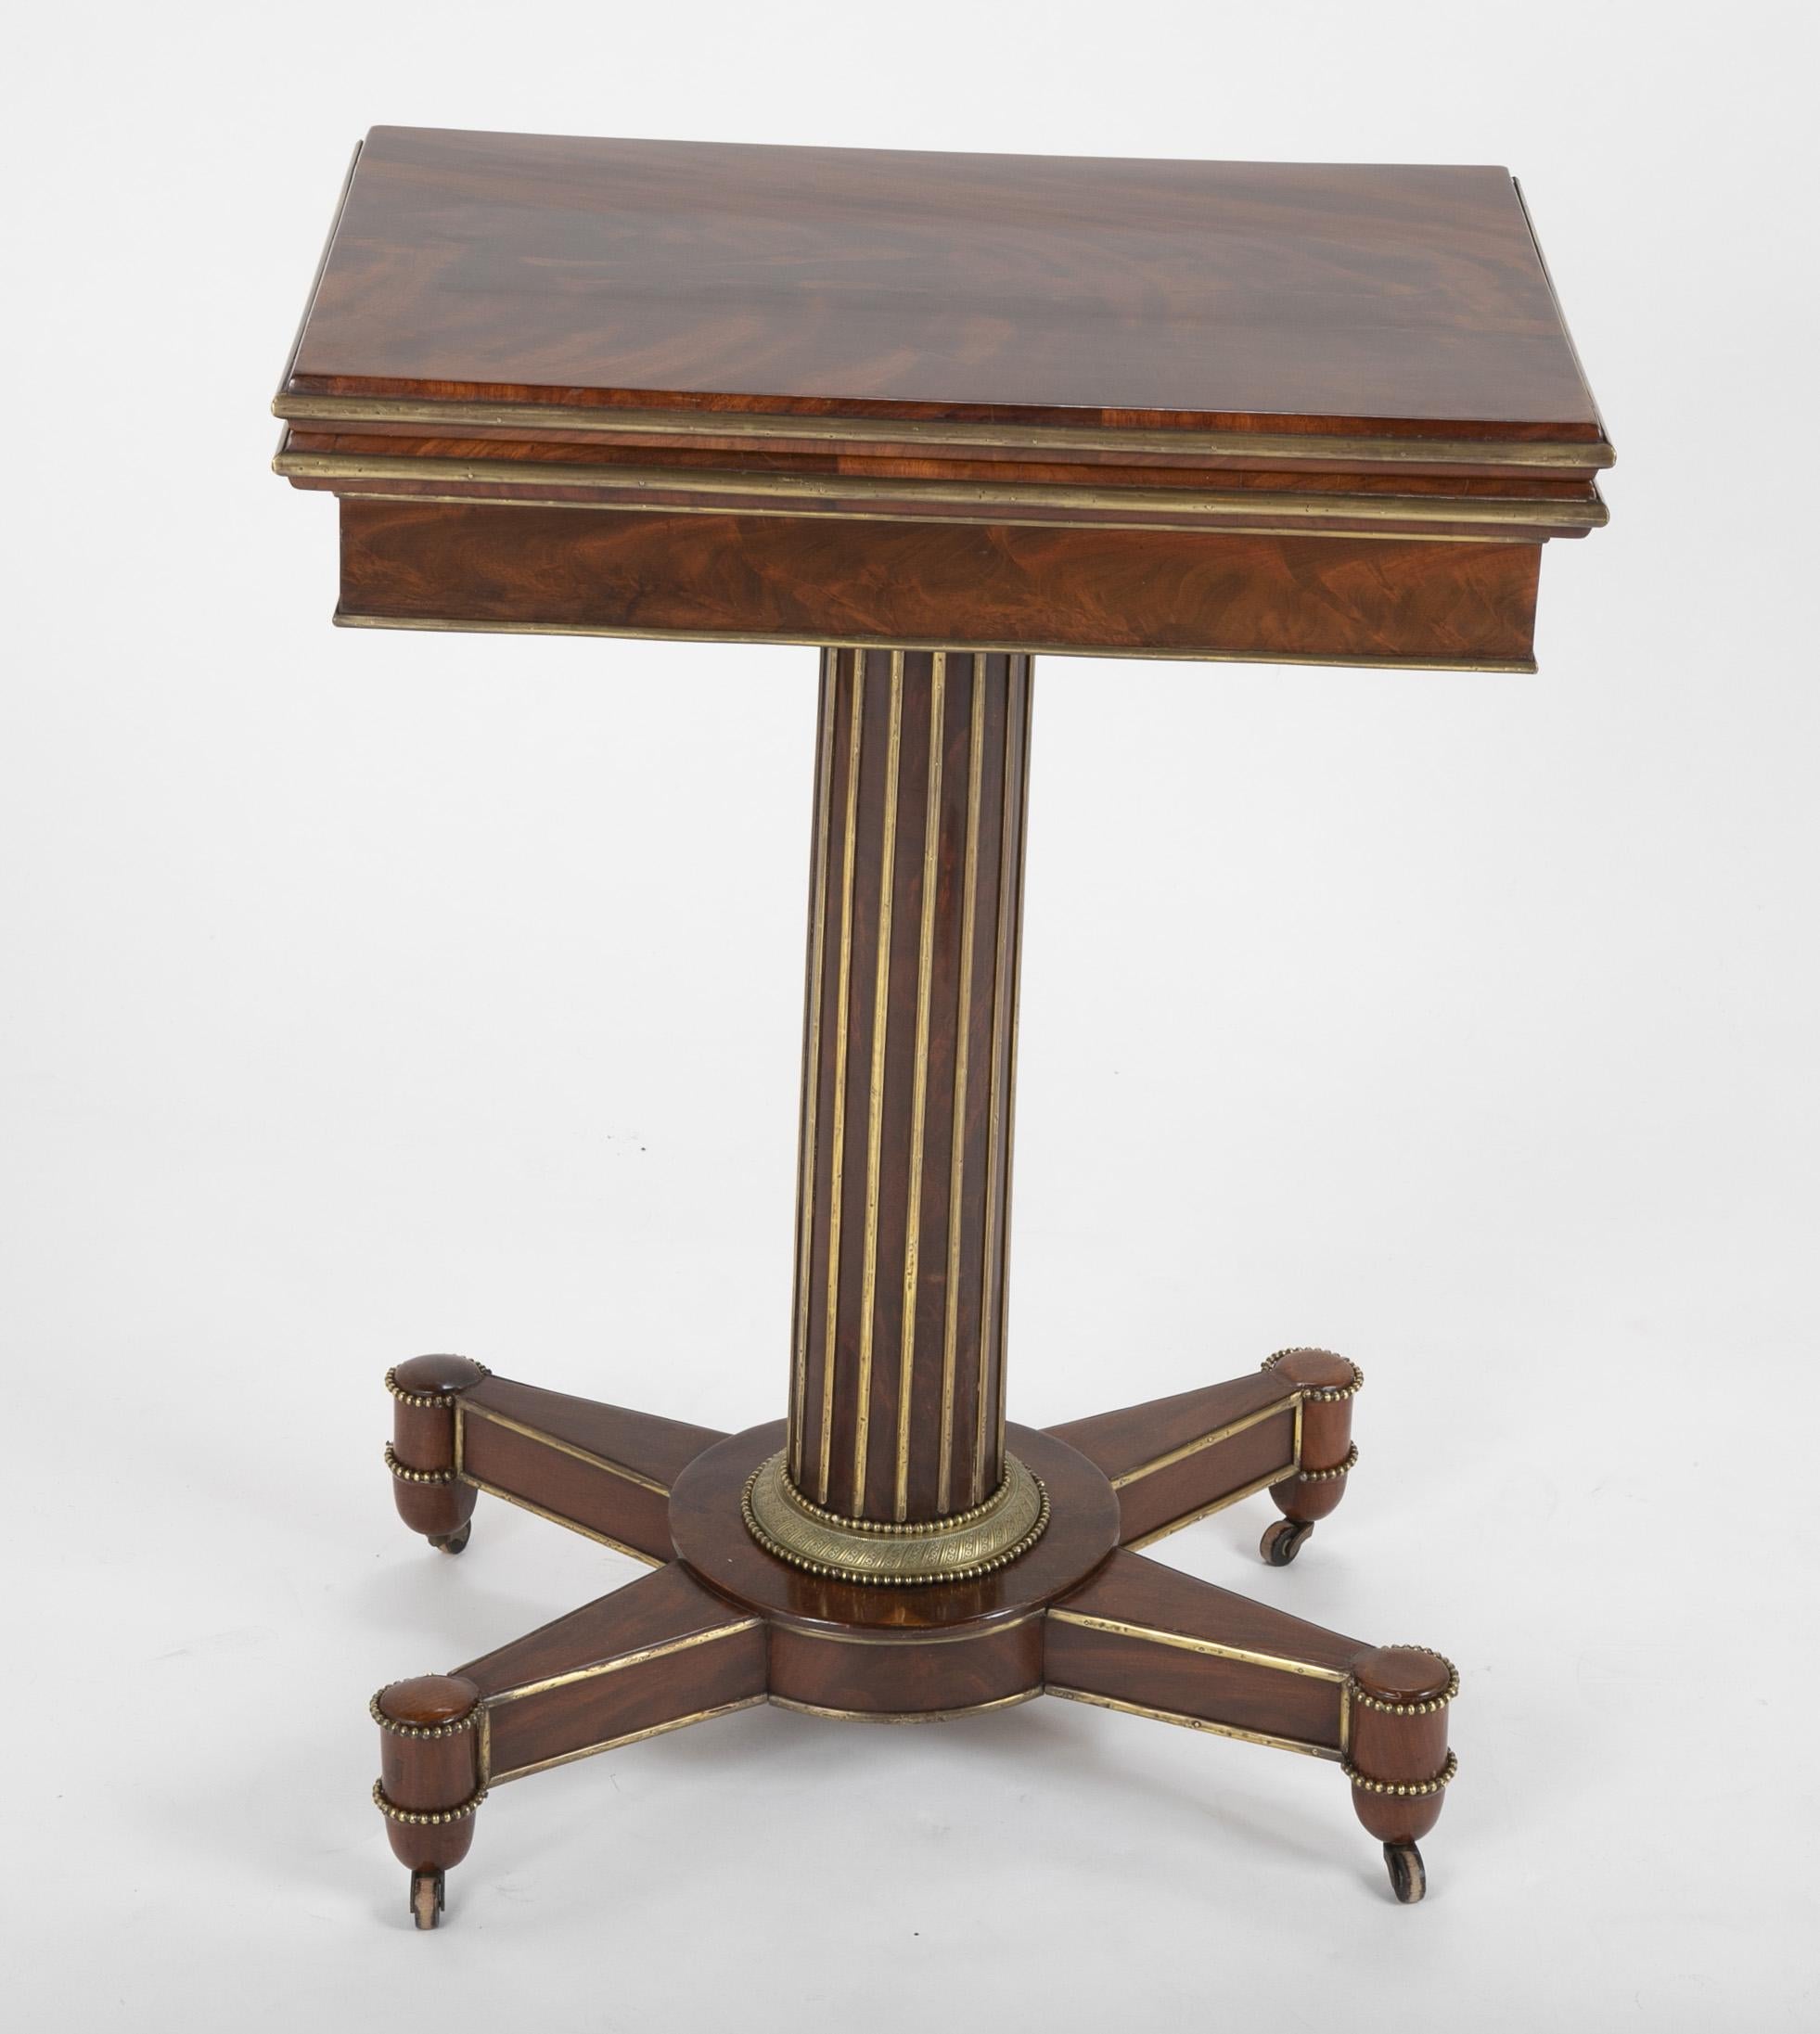 A Northern European Empire games table. Flamed mahogany top opens to reveal felt lined game surface. Brass mounts embellish a neoclassic sensibility.